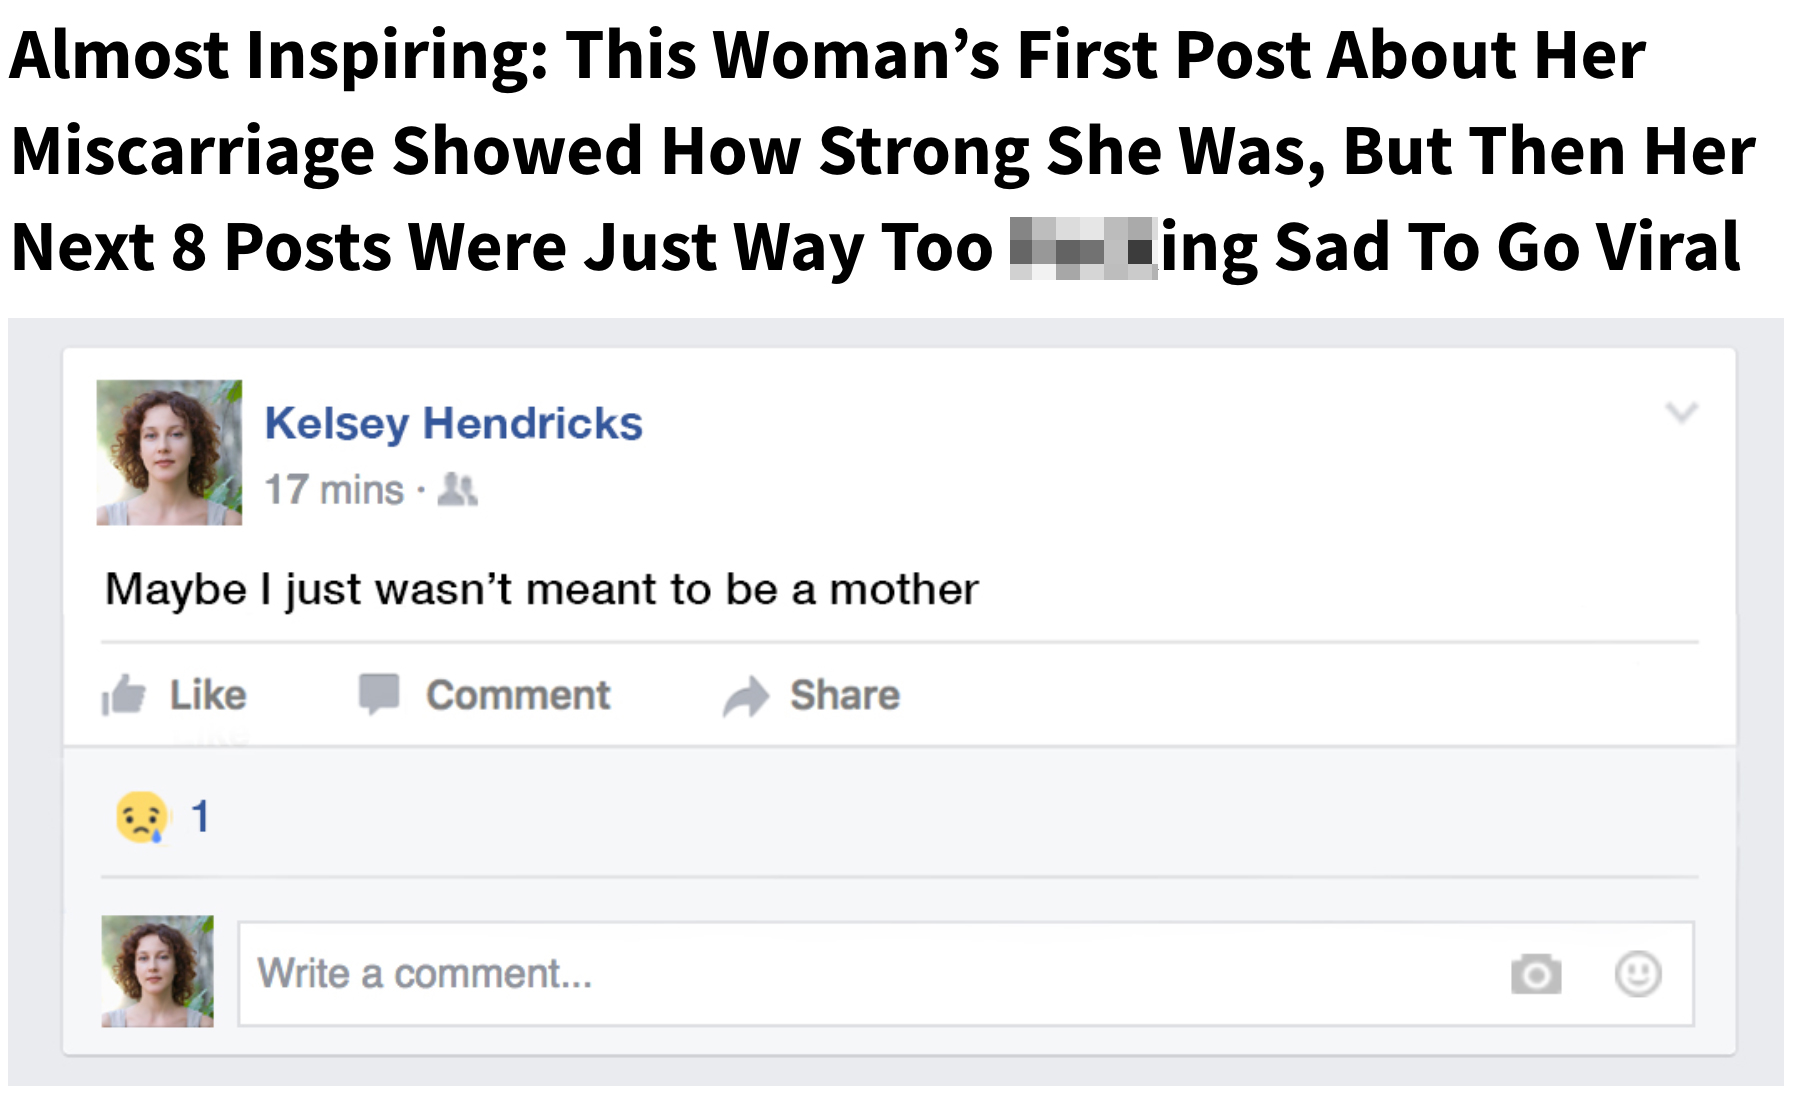 clickhole headlines - Almost Inspiring This Woman's First Post About Her Miscarriage Showed How Strong She Was, But Then Her Next 8 Posts Were Just Way Too Fucking Sad To Go Viral Kelsey Hendricks 17 mins. Maybe I just wasn't meant to be a mother